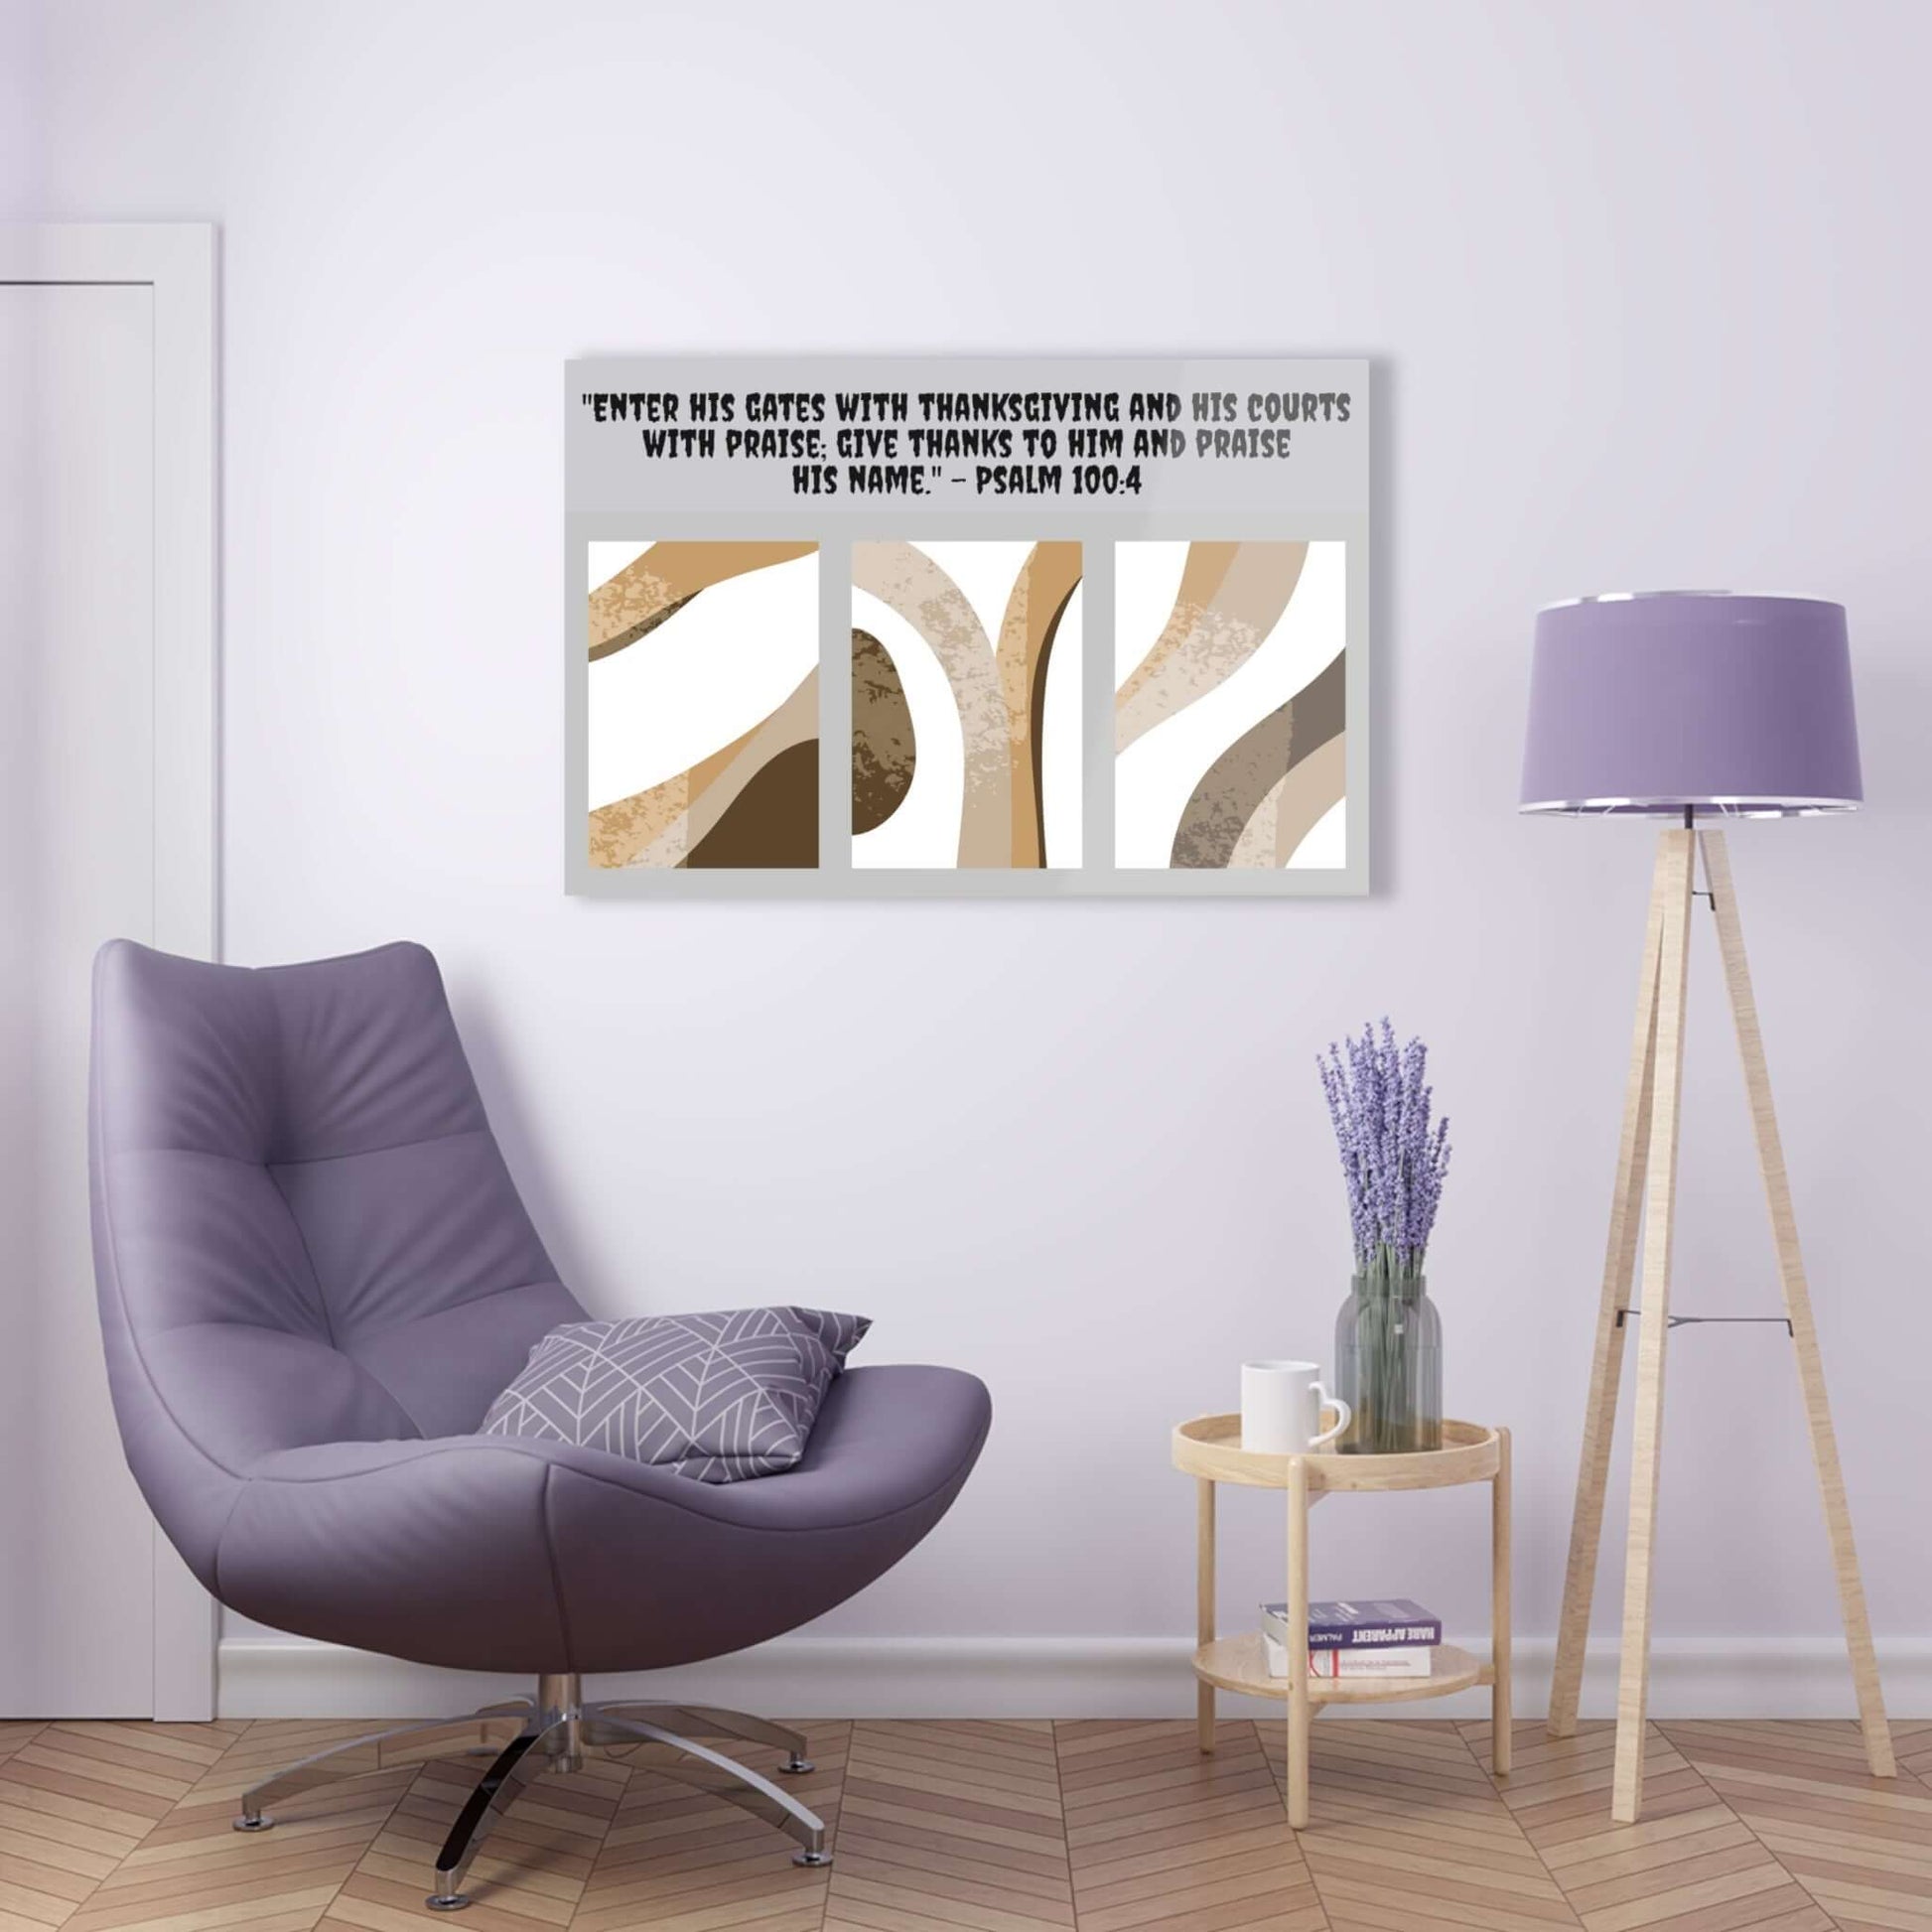 Neutral Wall Art - Acrylic Print with Psalm 100:4 | Art & Wall Decor,Assembled in the USA,Assembled in USA,Decor,Home & Living,Home Decor,Indoor,Made in the USA,Made in USA,Poster